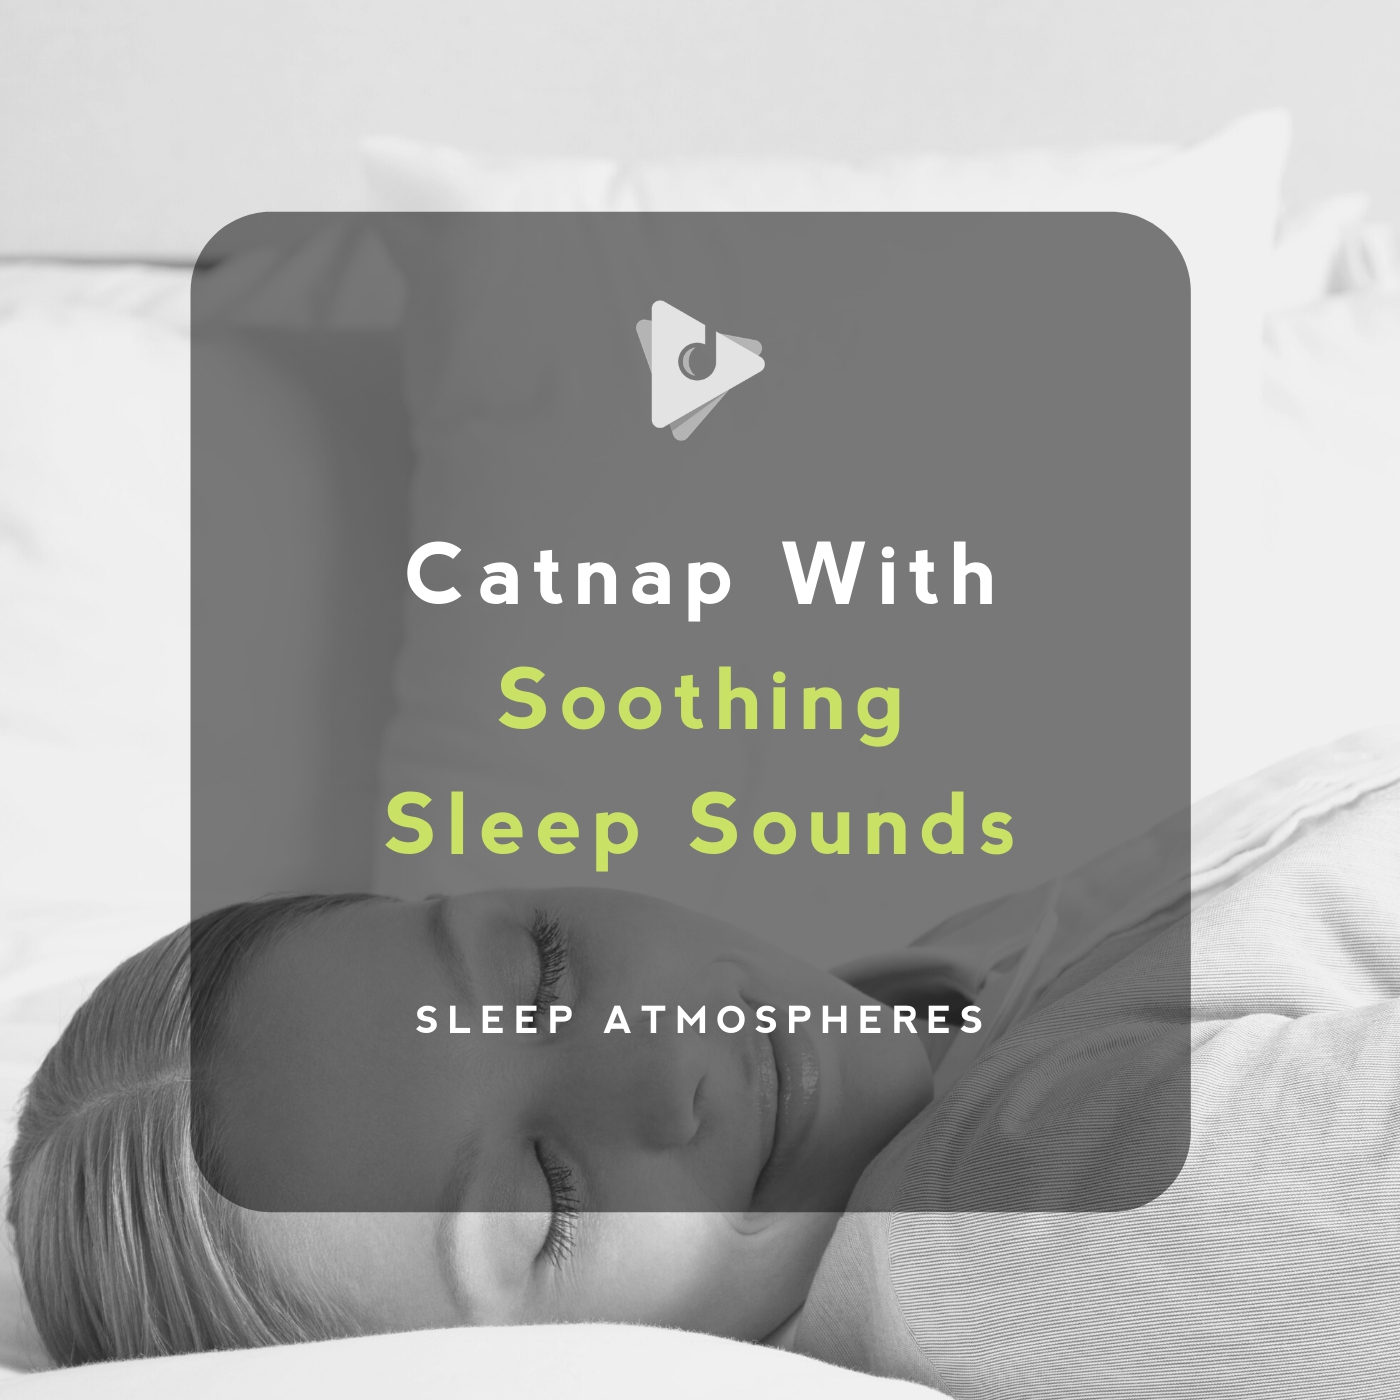 Catnap With Soothing Sleep Sounds